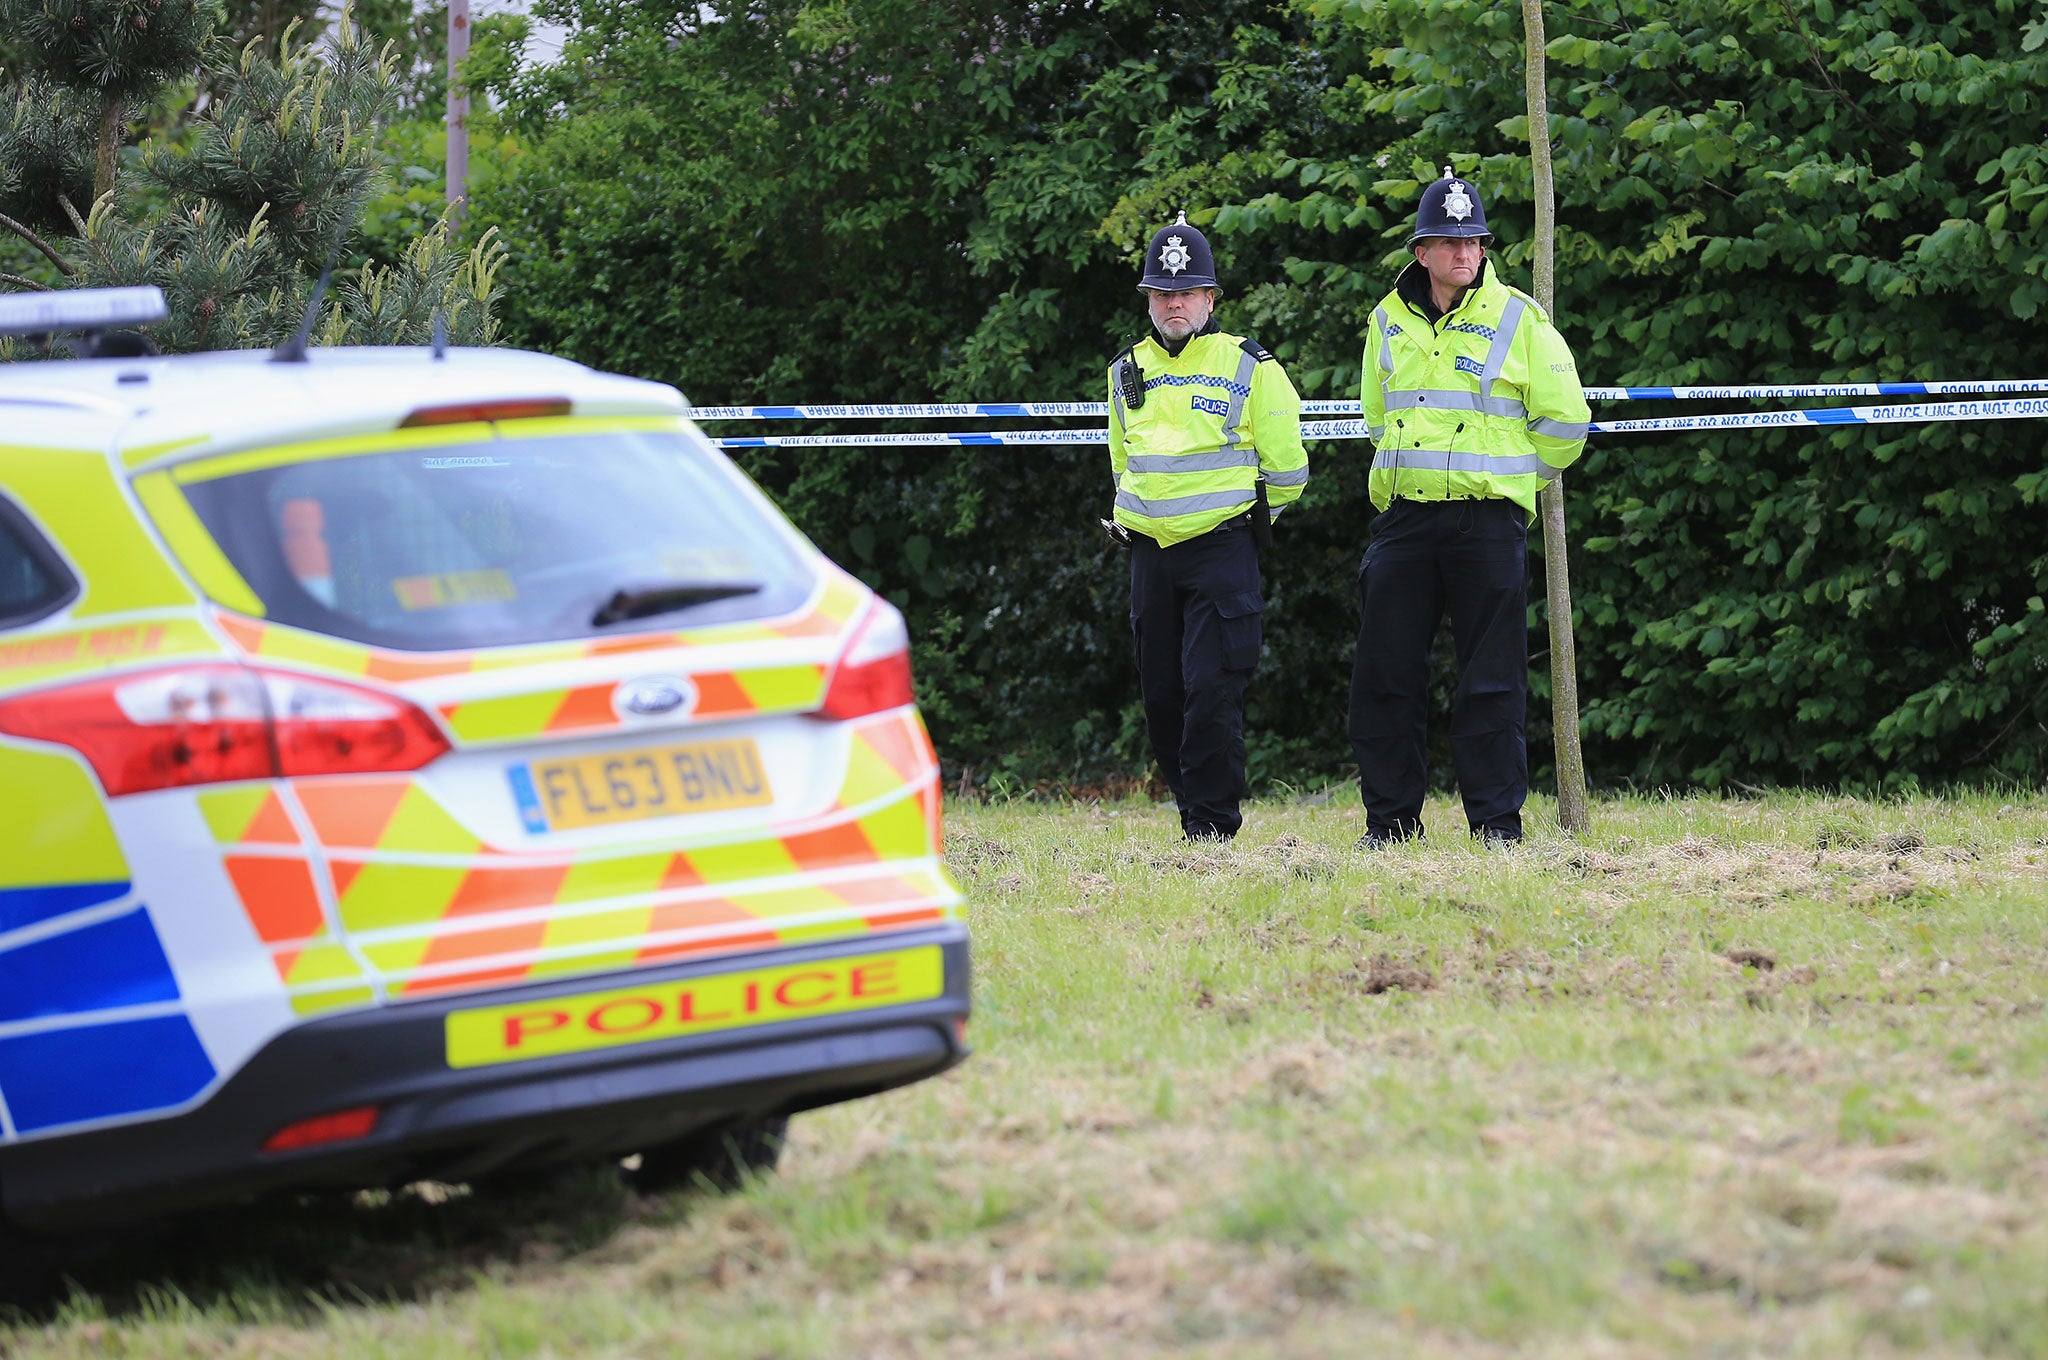 Police guard the area where a body was found during the search for missing teenager Amber Peat